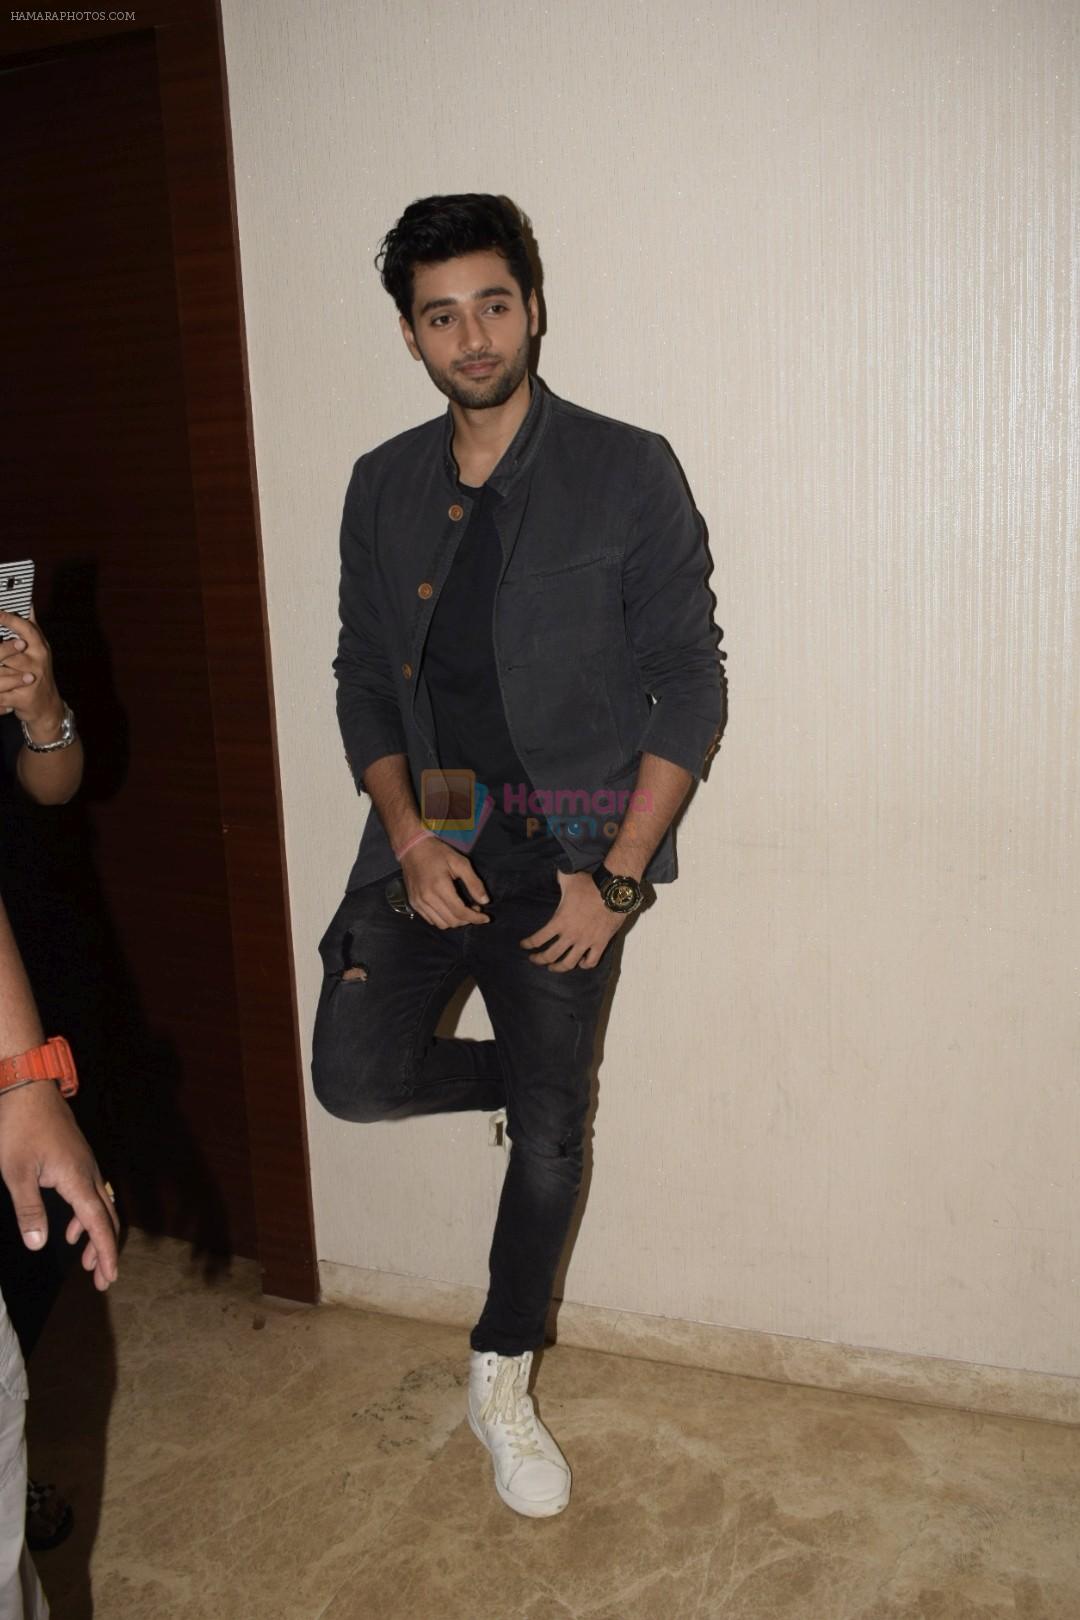 Utkarsh Sharma at the Trailer launch of Utkarsh Sharma's debut film Genius at The View in andheri on 24th July 2018